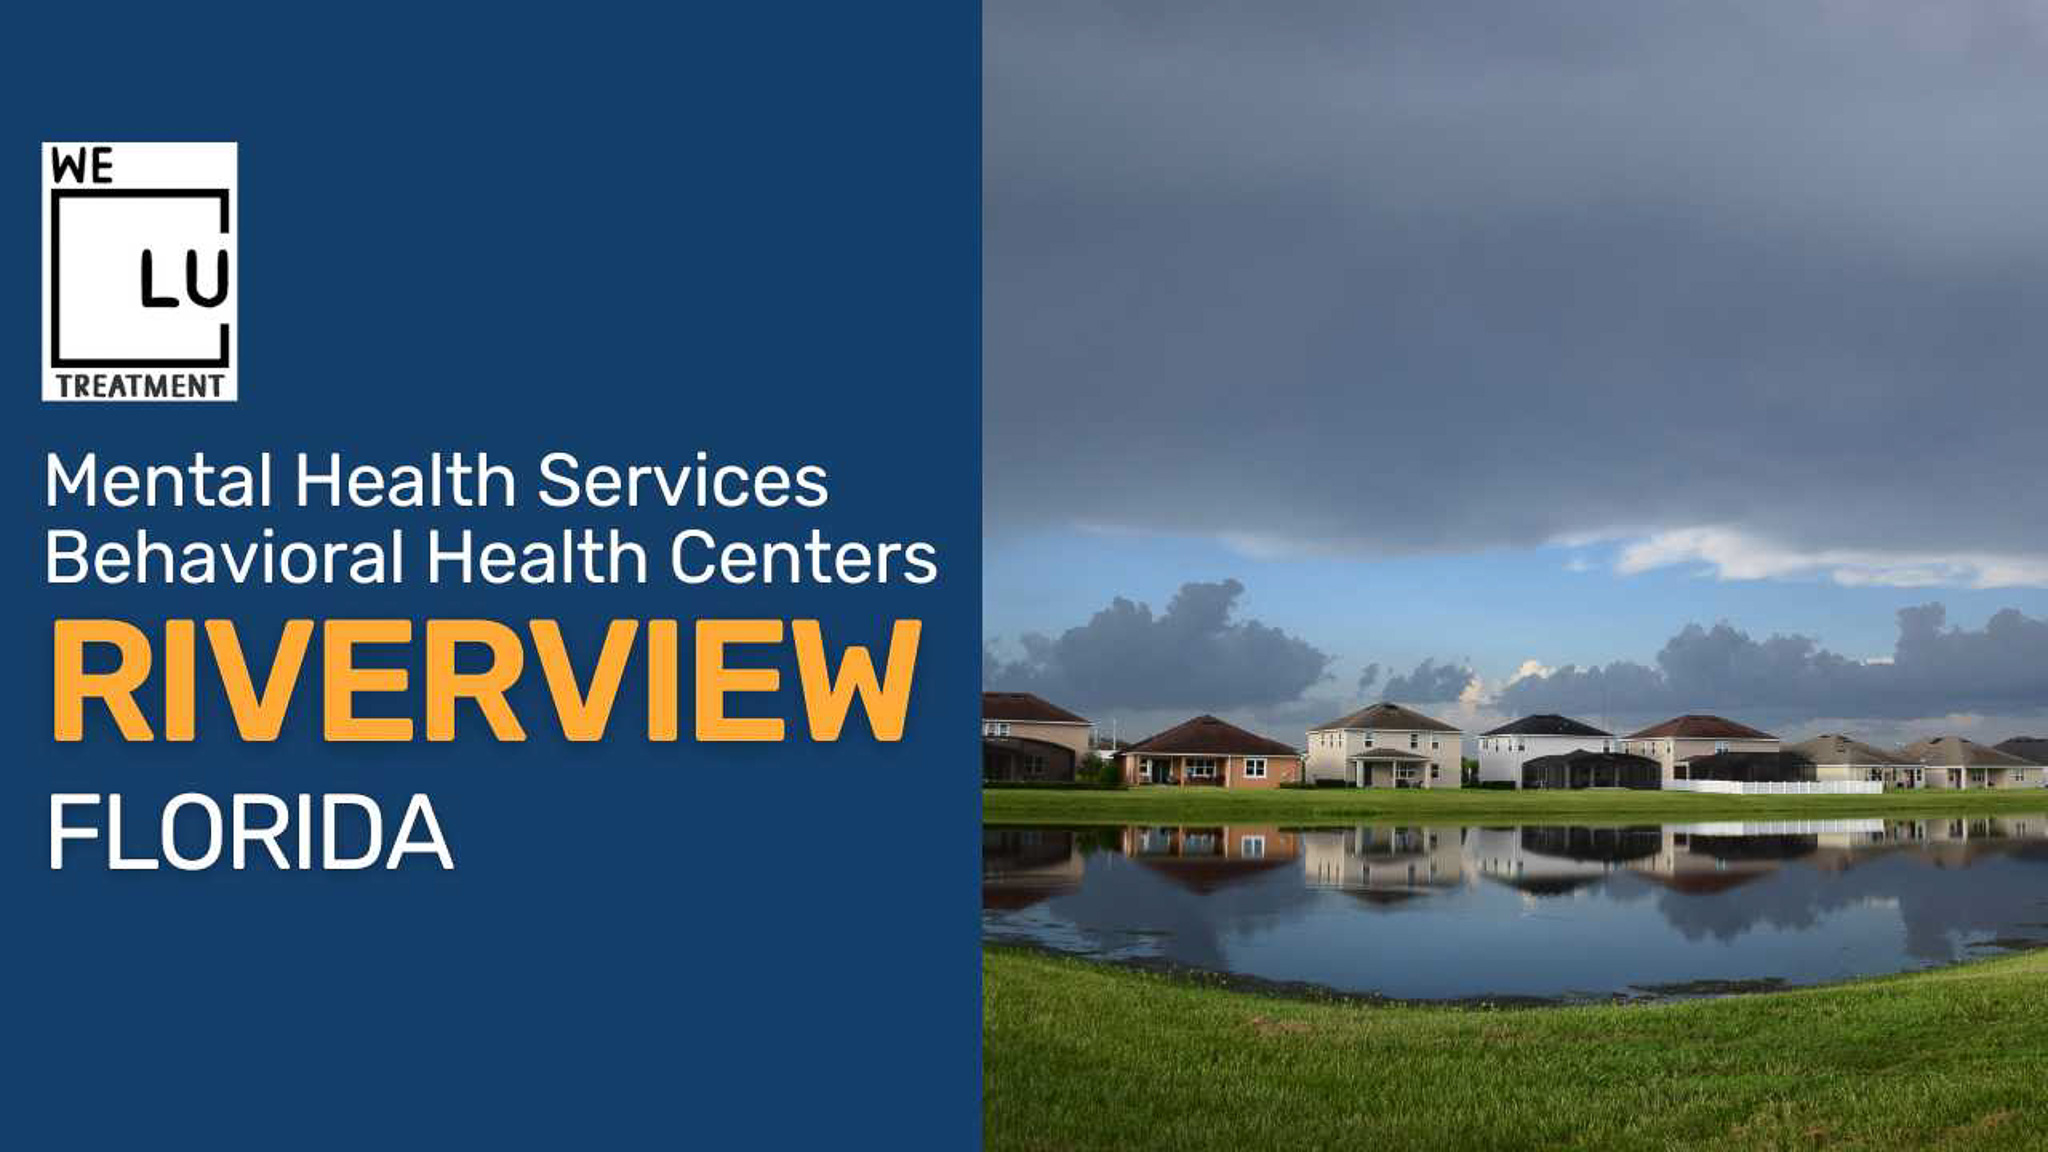 Riverview FL (MH) We Level Up treatment center for drug and alcohol rehab detox and mental health services - Image 1